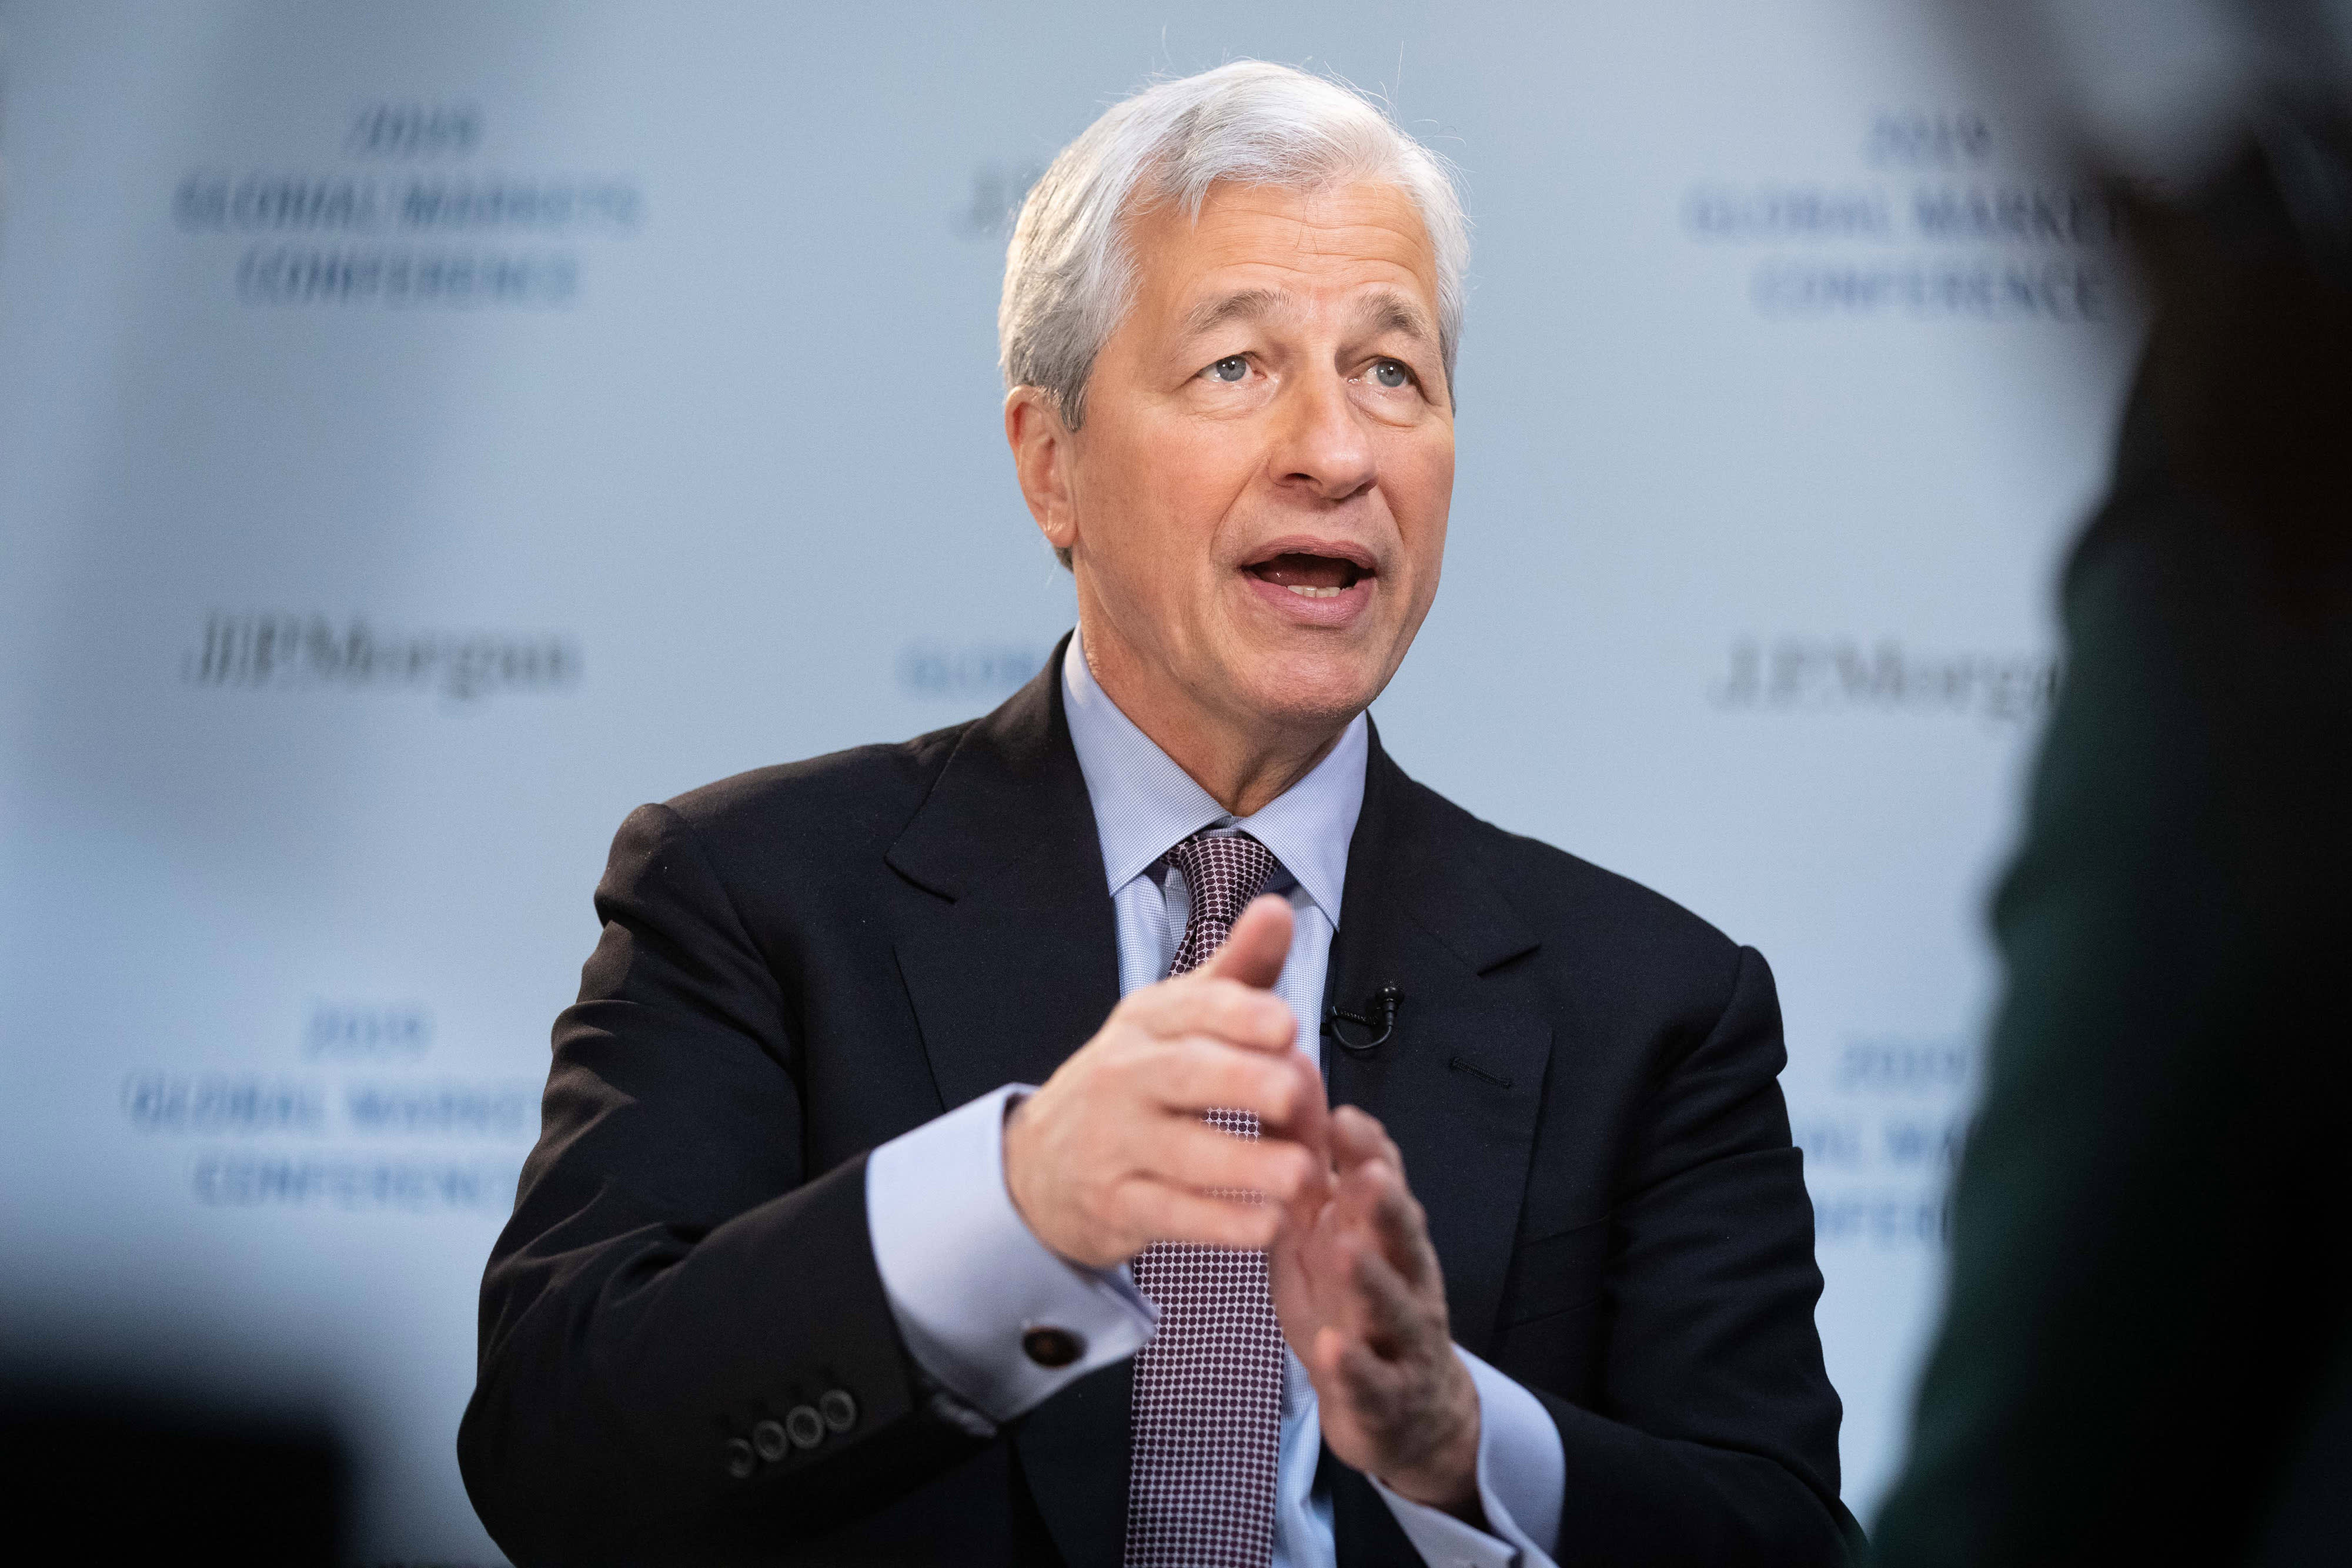 JPMorgan CEO Jamie Dimon on being fired: 'It impacted my net worth, not my self worth'